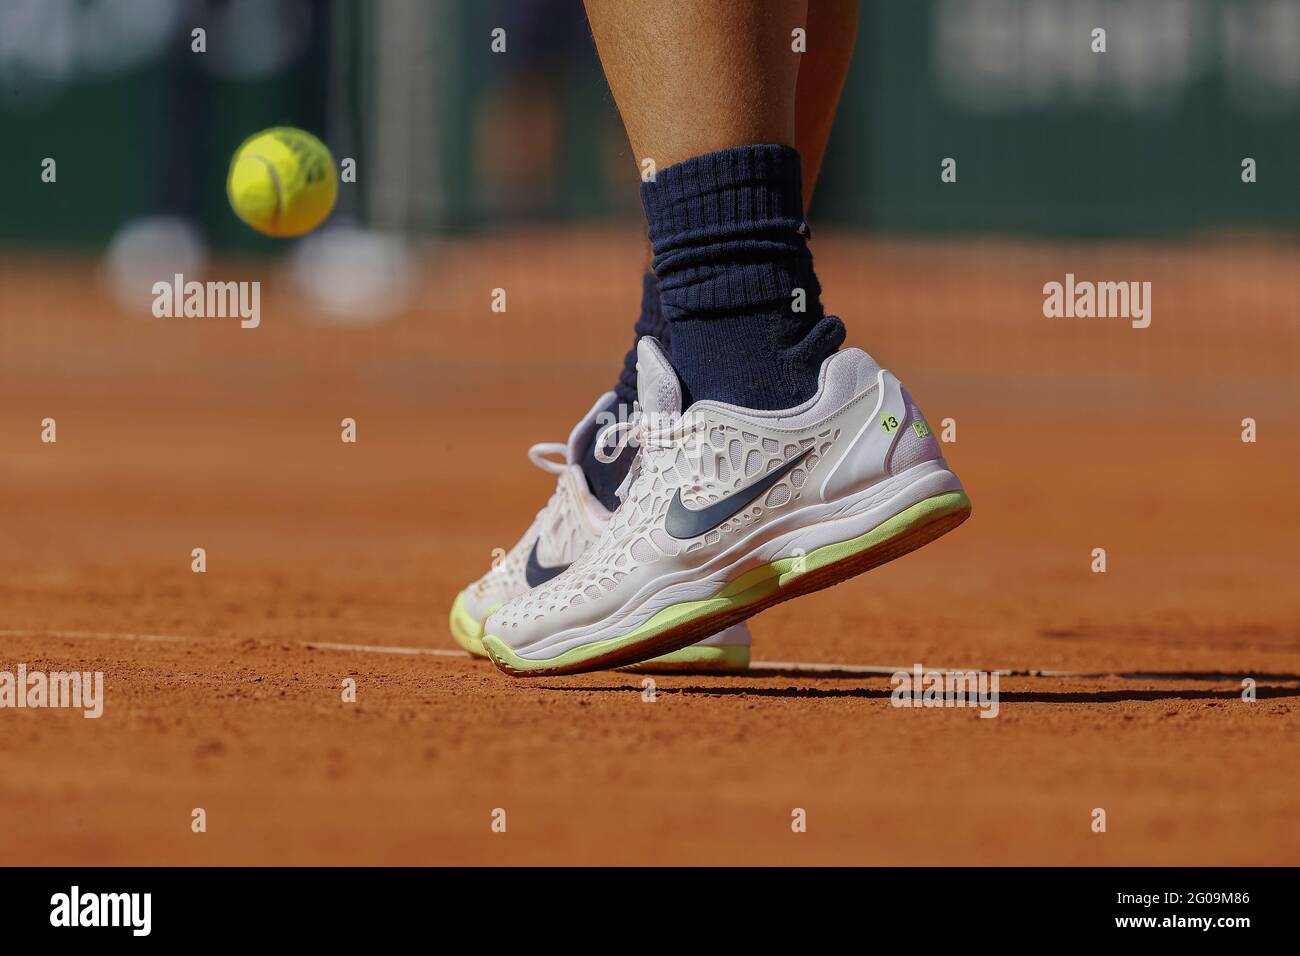 Paris, France, June 1, 2021, Rafael Nadal of Spain, illustration shoes with  special inscription "13" during the first round of Roland-Garros 2021,  Grand Slam tennis tournament on June 01, 2021 at Roland-Garros